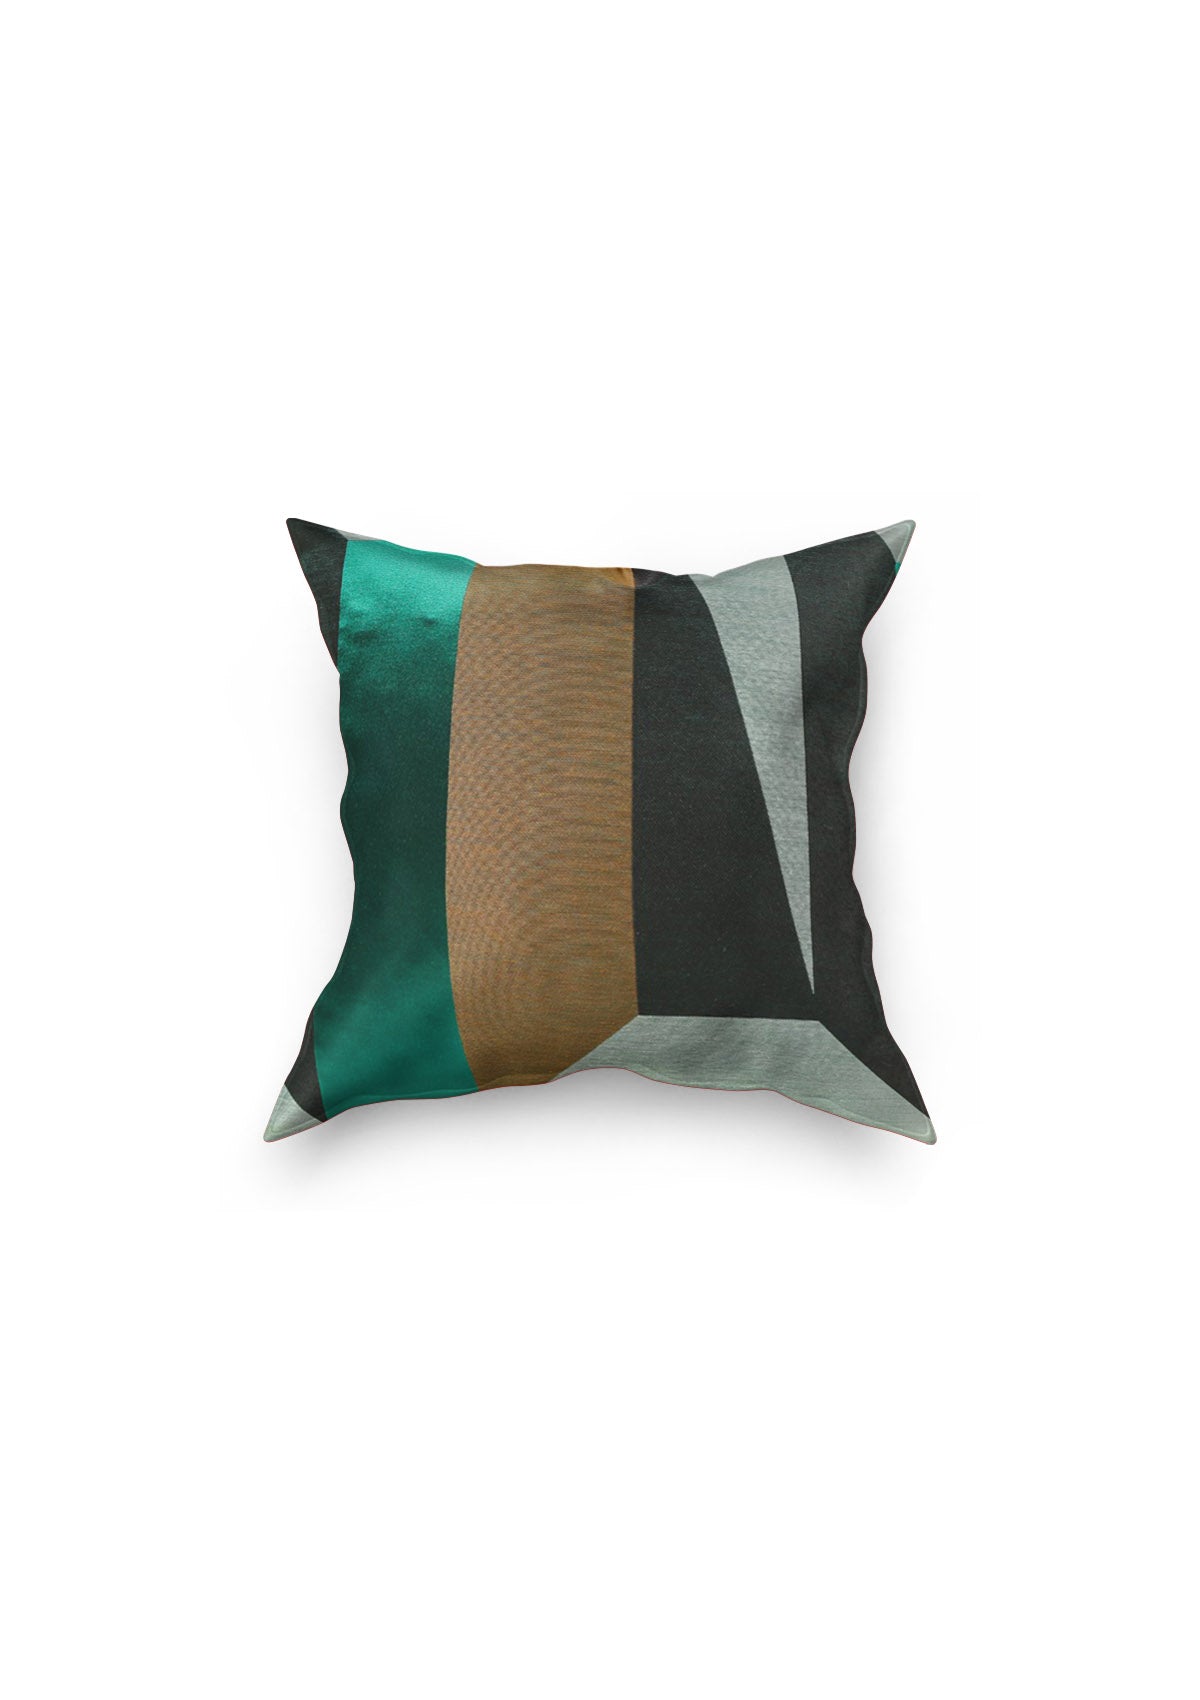 Dark Green and Gold Cushion Covers | CovermyCushion